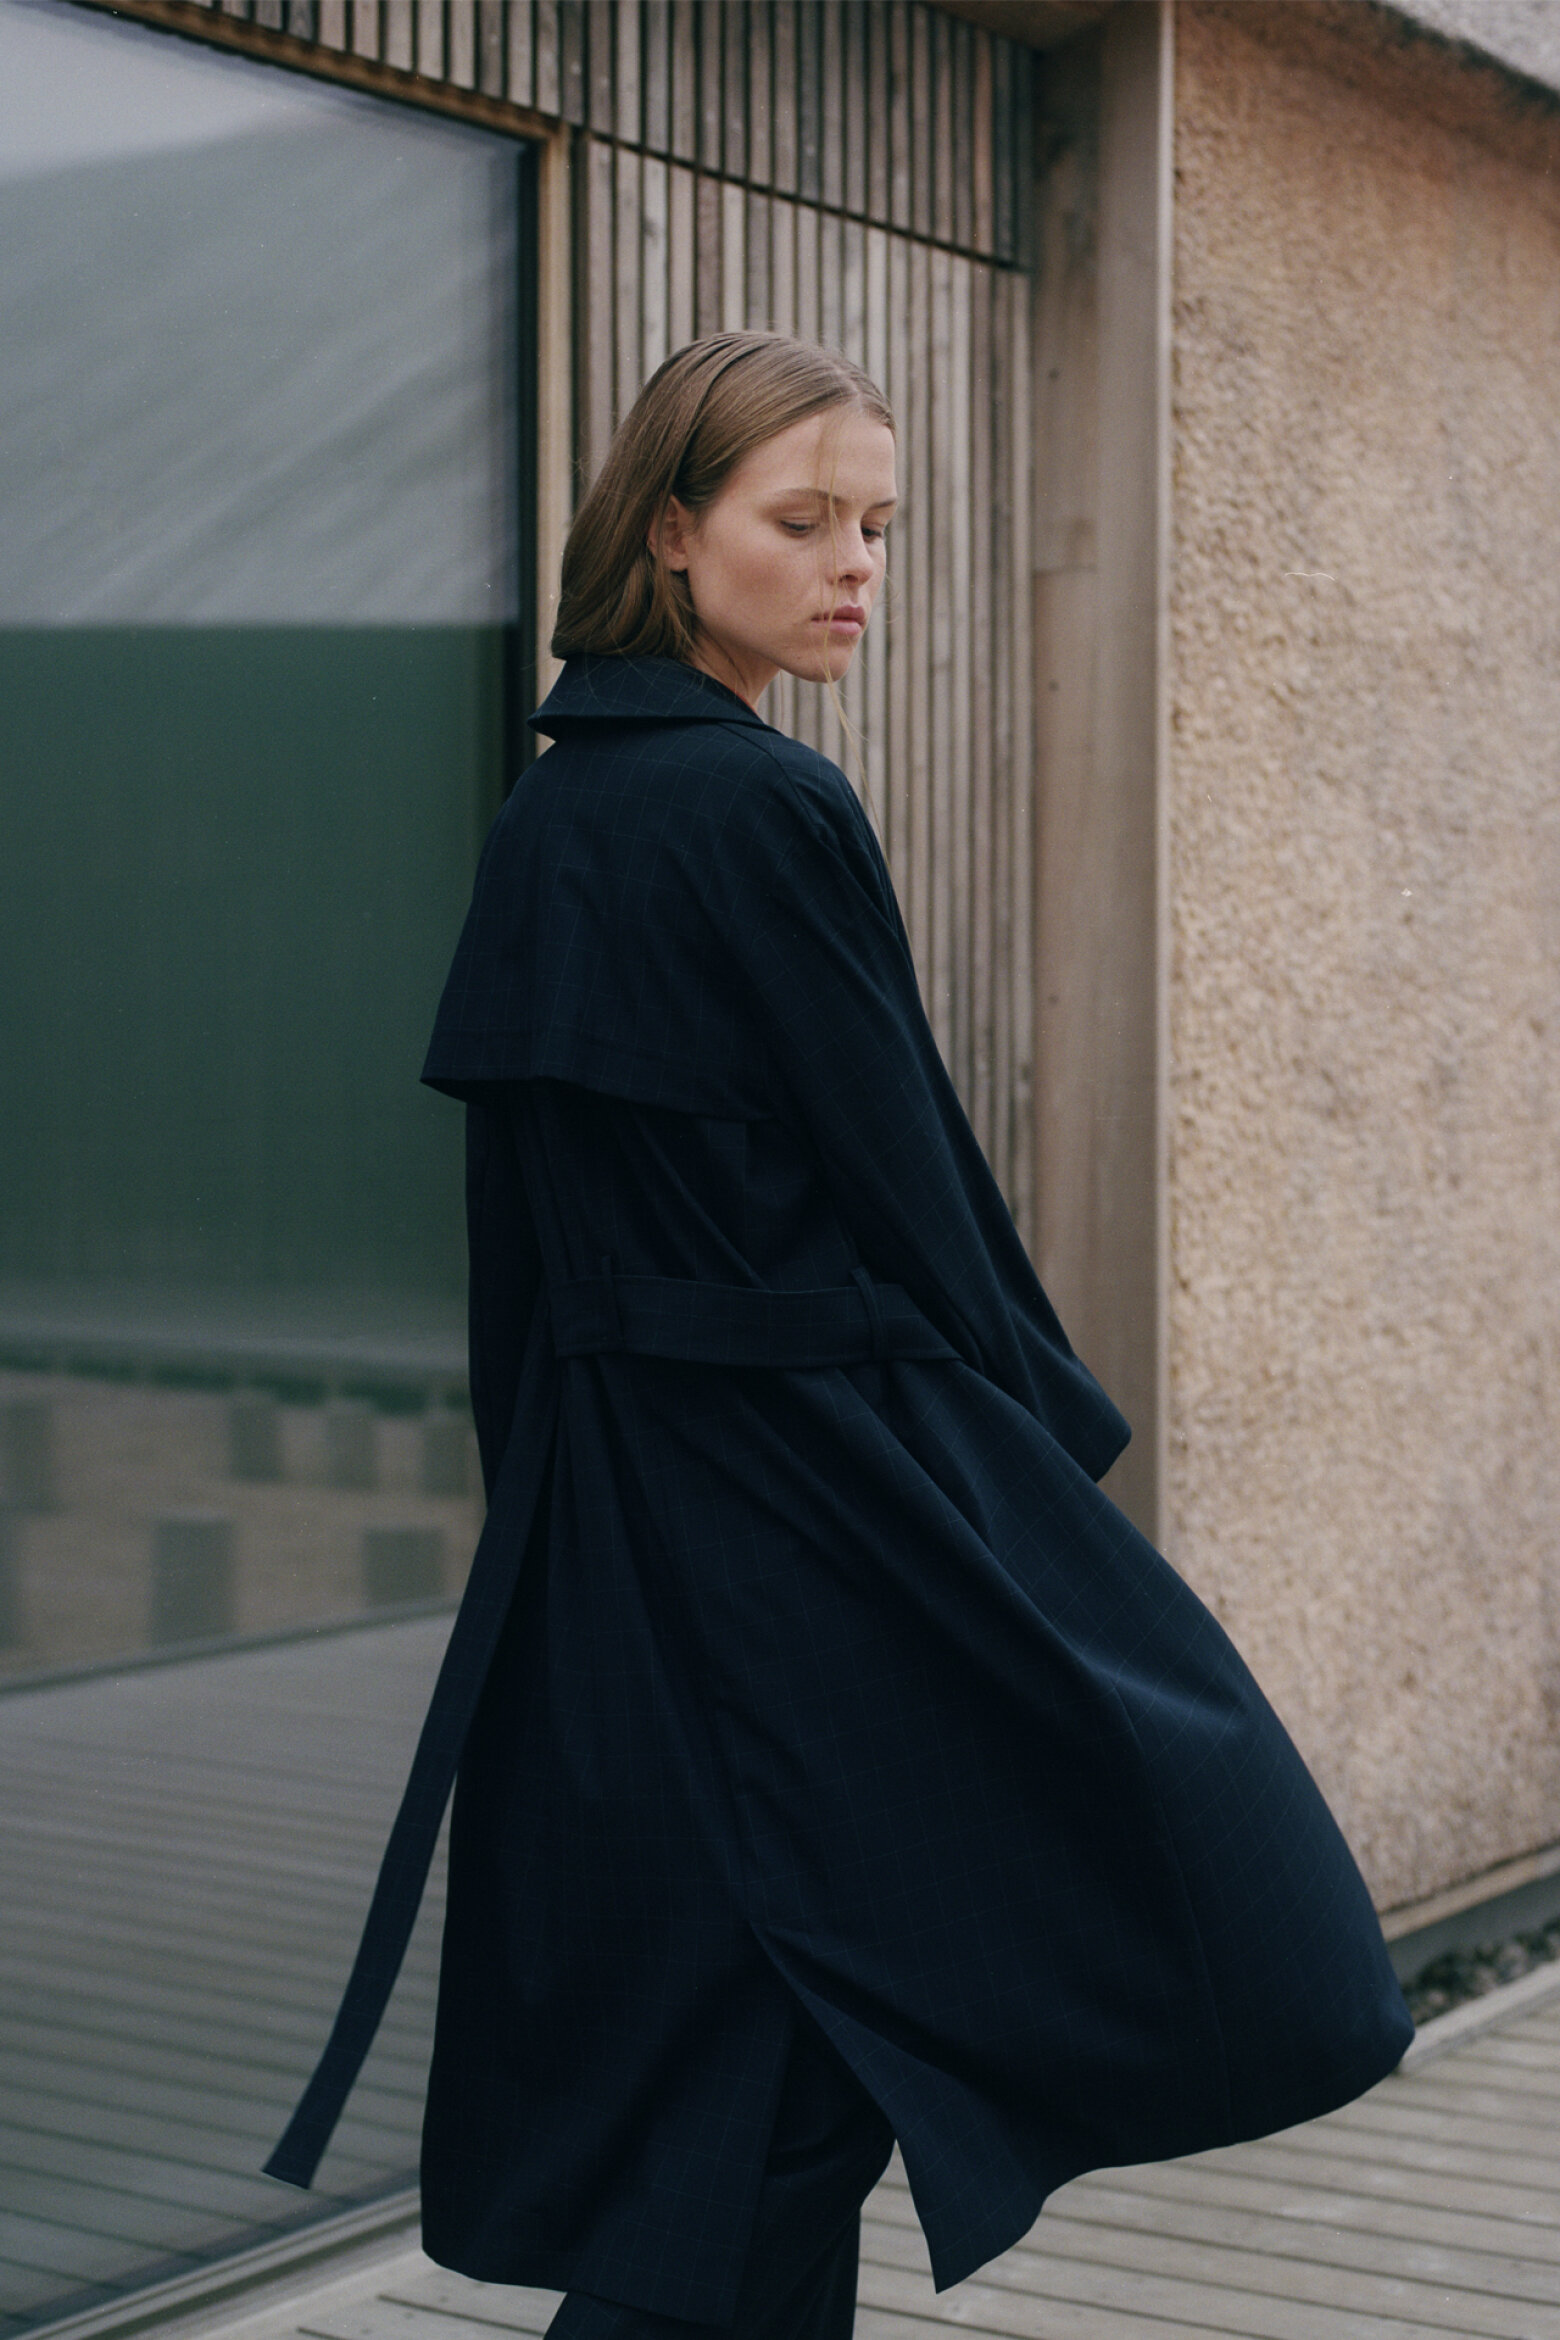 Norse Store | Shipping Worldwide - Norse Projects Women's SS18 Campaign